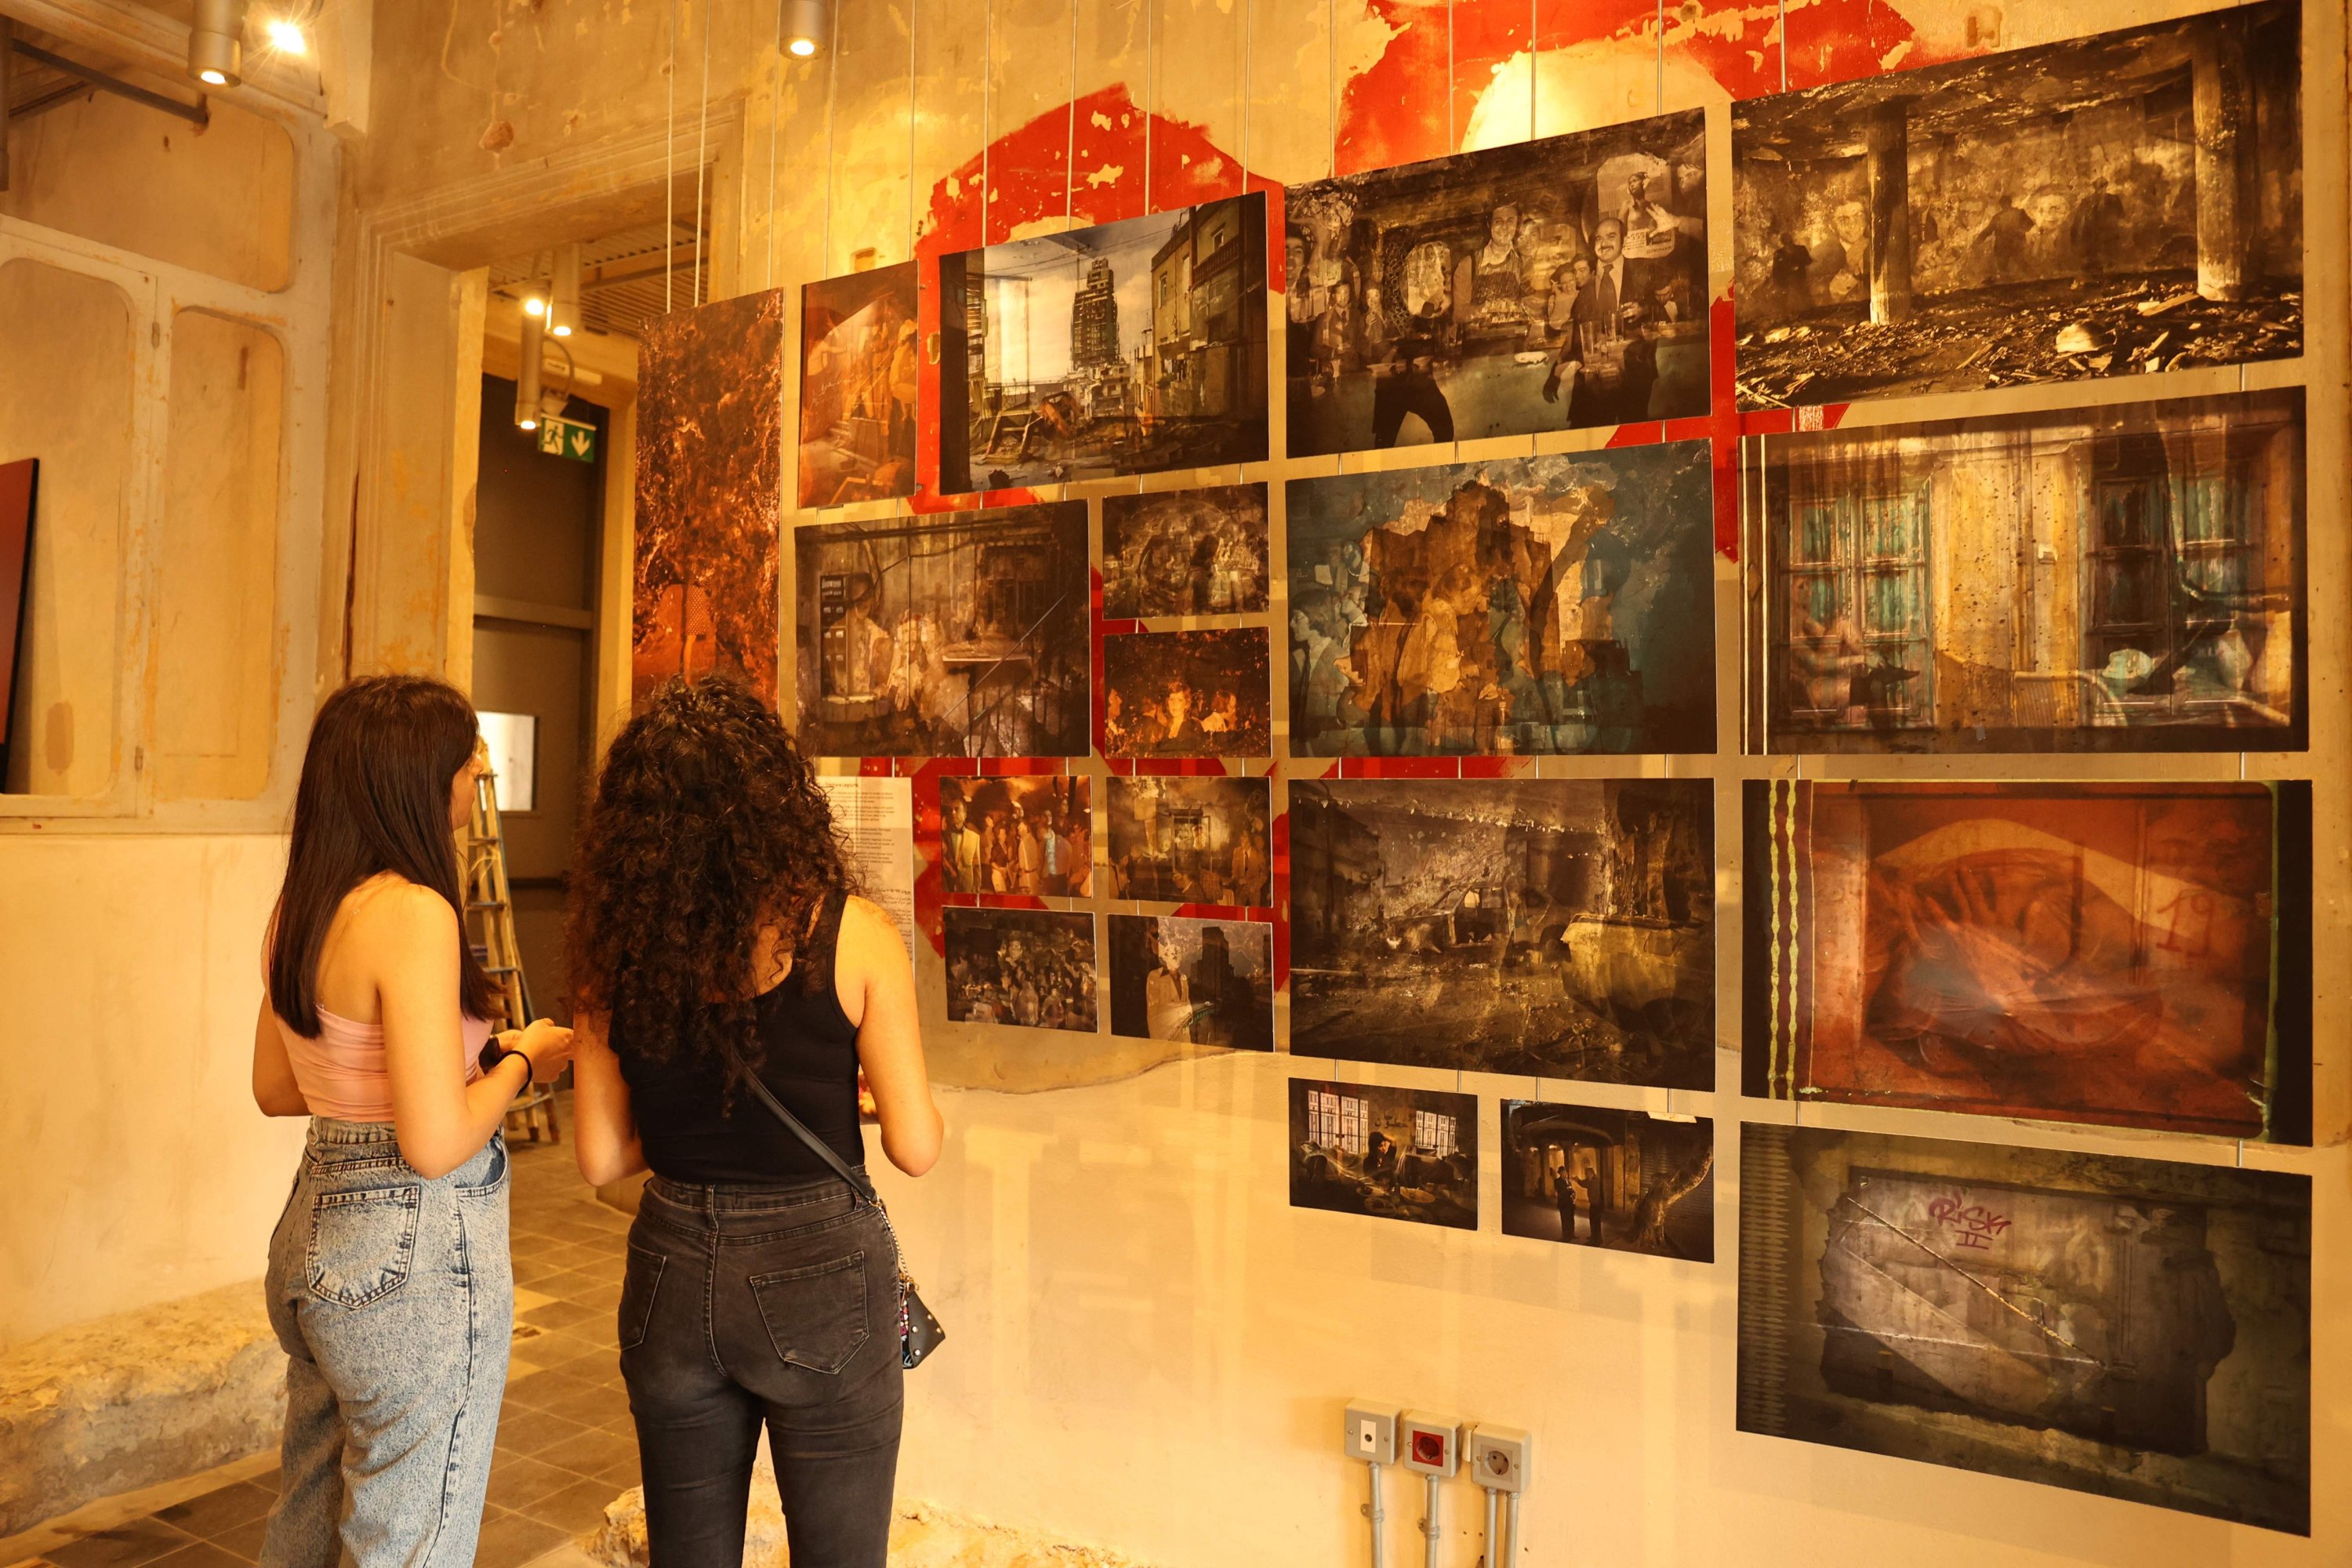 People in an exhibition titled "Allo, Beirut?," that shows archives of Lebanon's troubled past fused with artistic depictions of a grim present, at the capital's Beit Beirut heritage-house-turned-museum, Beirut, Lebanon, Sept. 15, 2022. (AFP Photo)